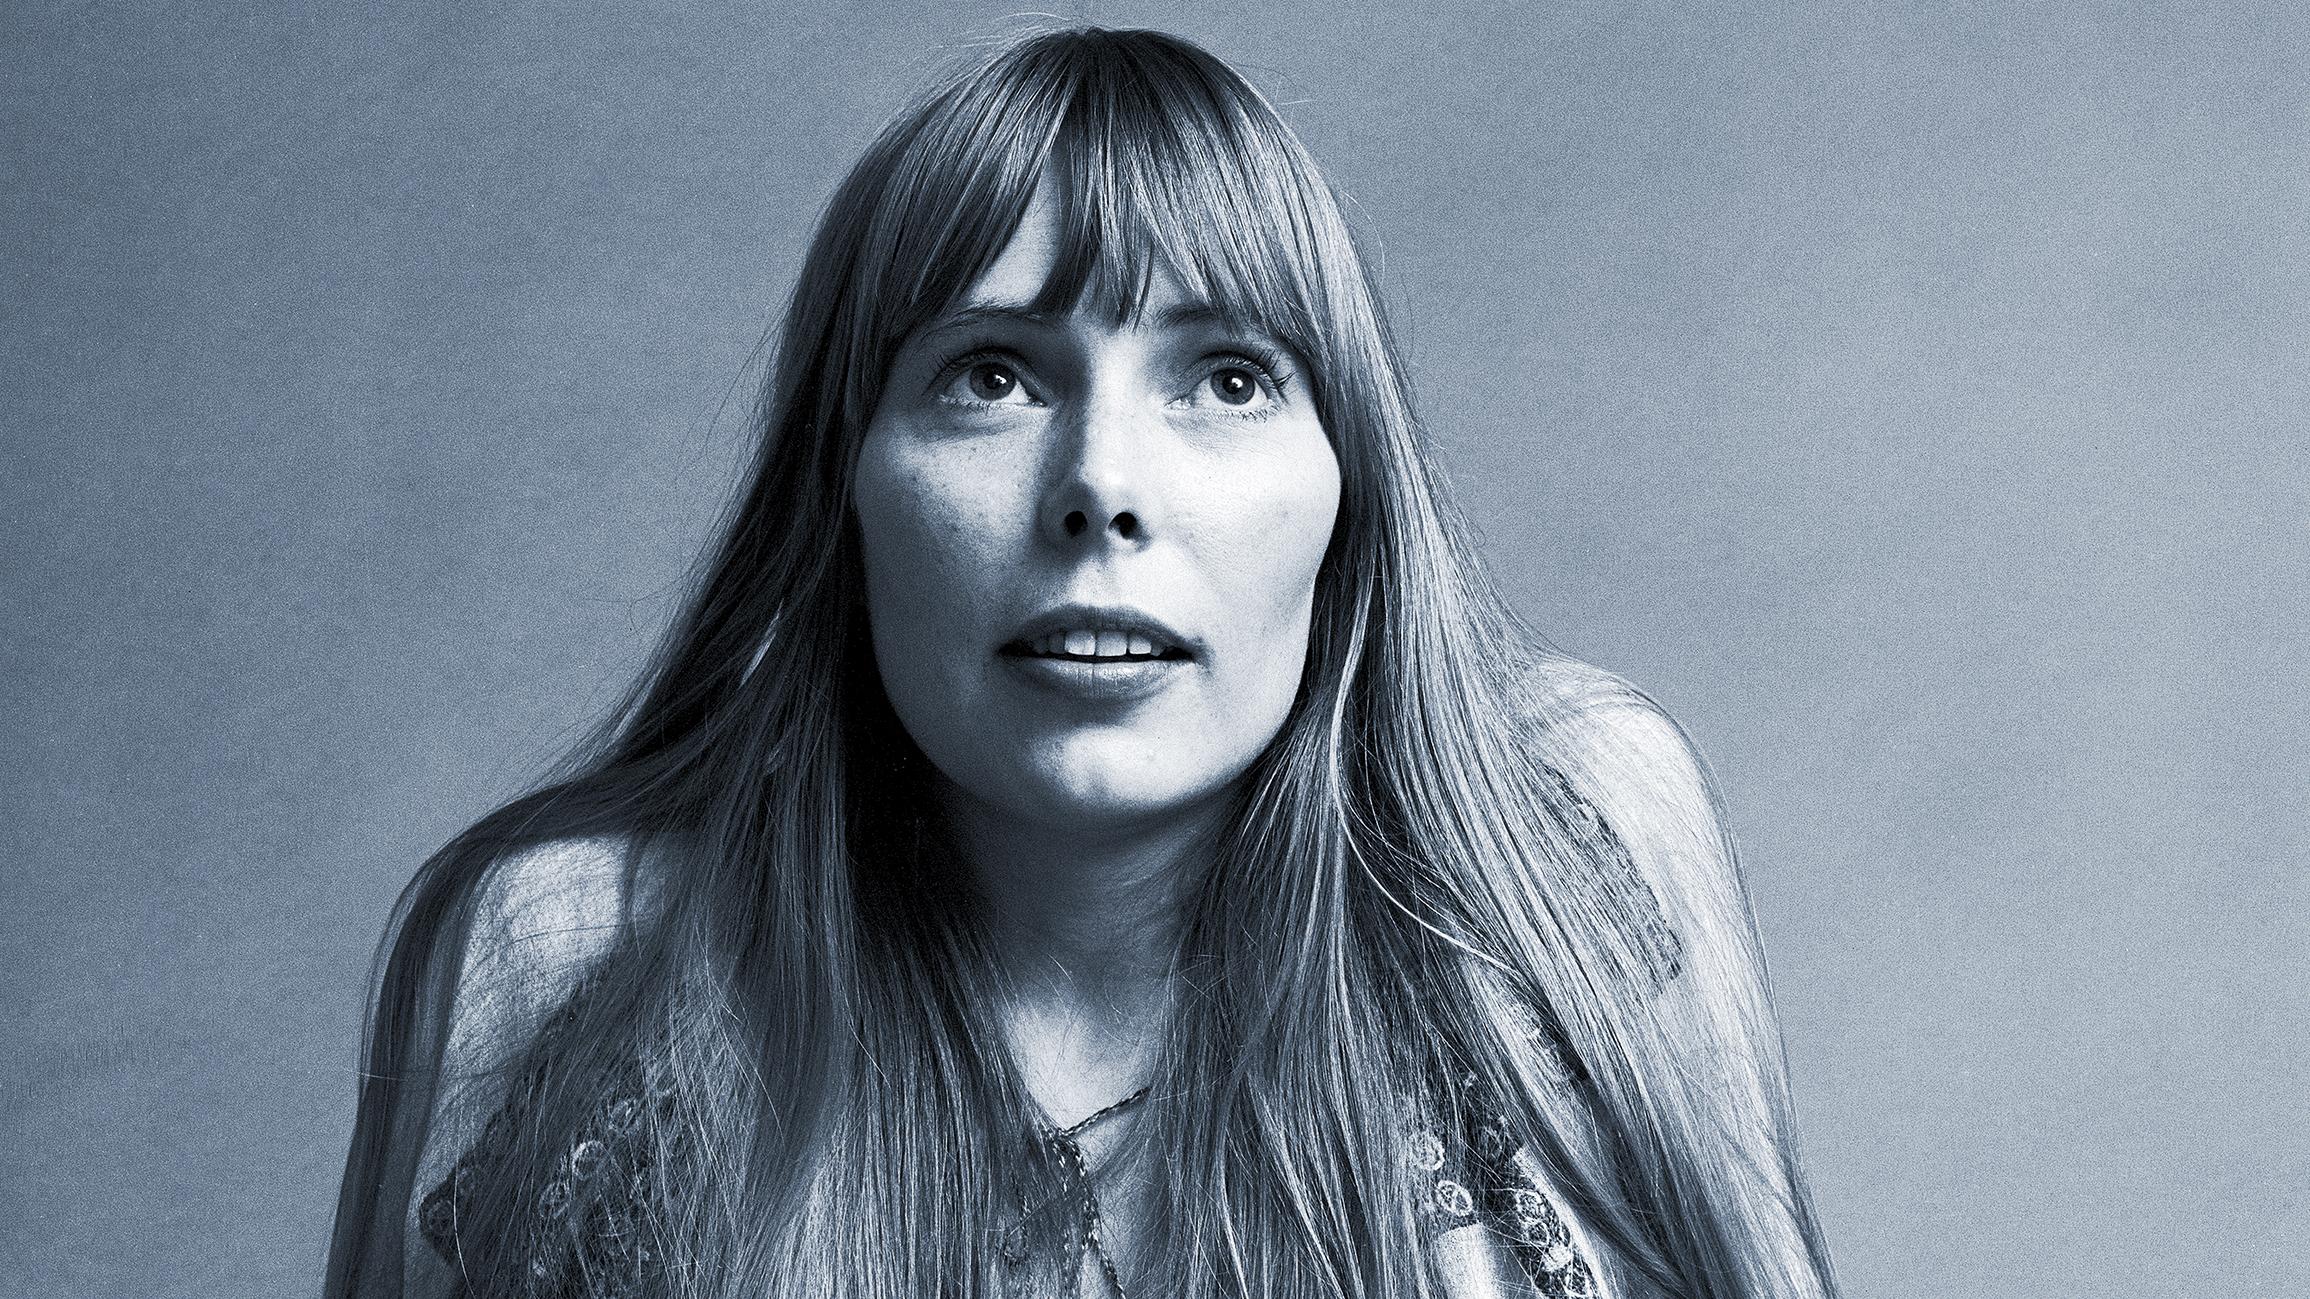 JONI MITCHELL THE ASYLUM ALBUMS (19721975) All About The Rock